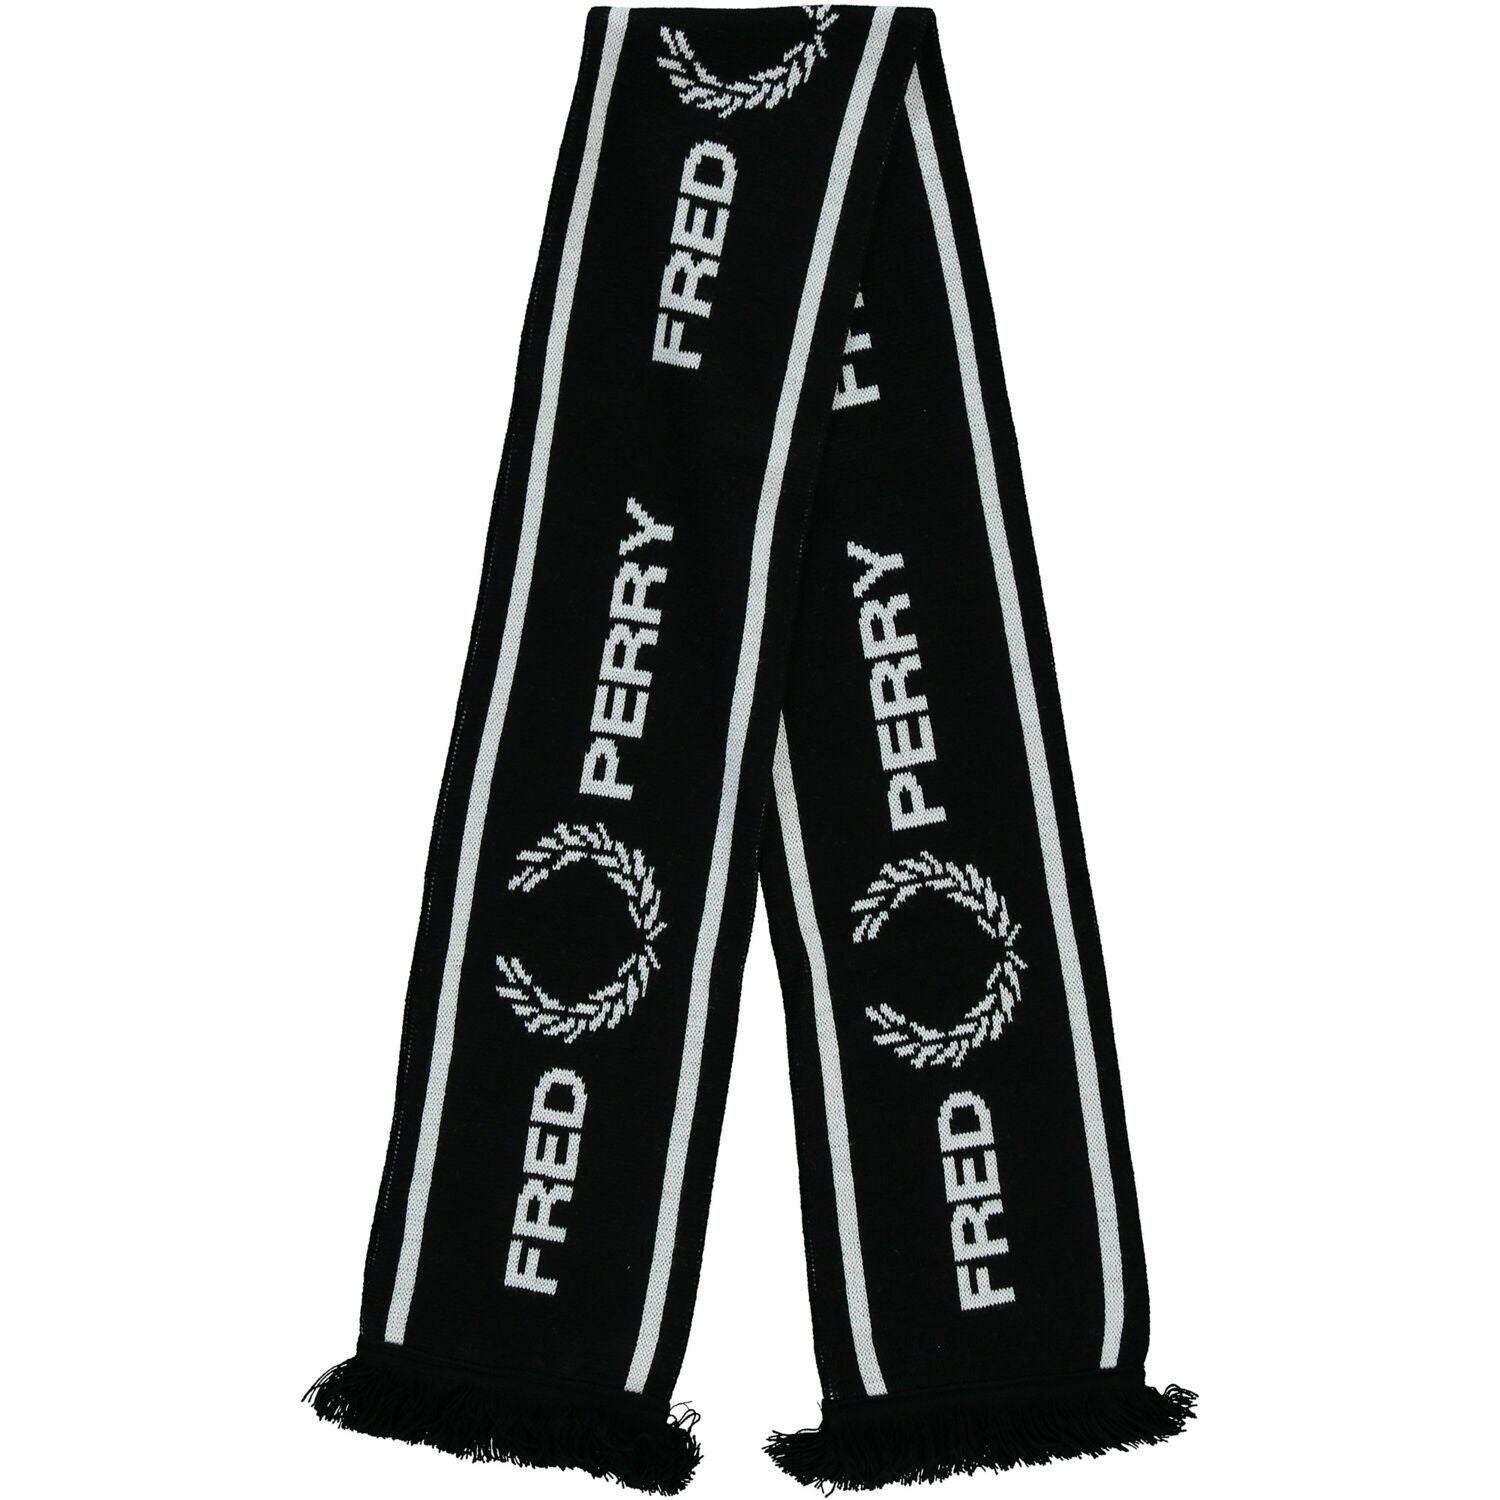 FRED PERRY Men's Black/White Knitted Scarf, made in England